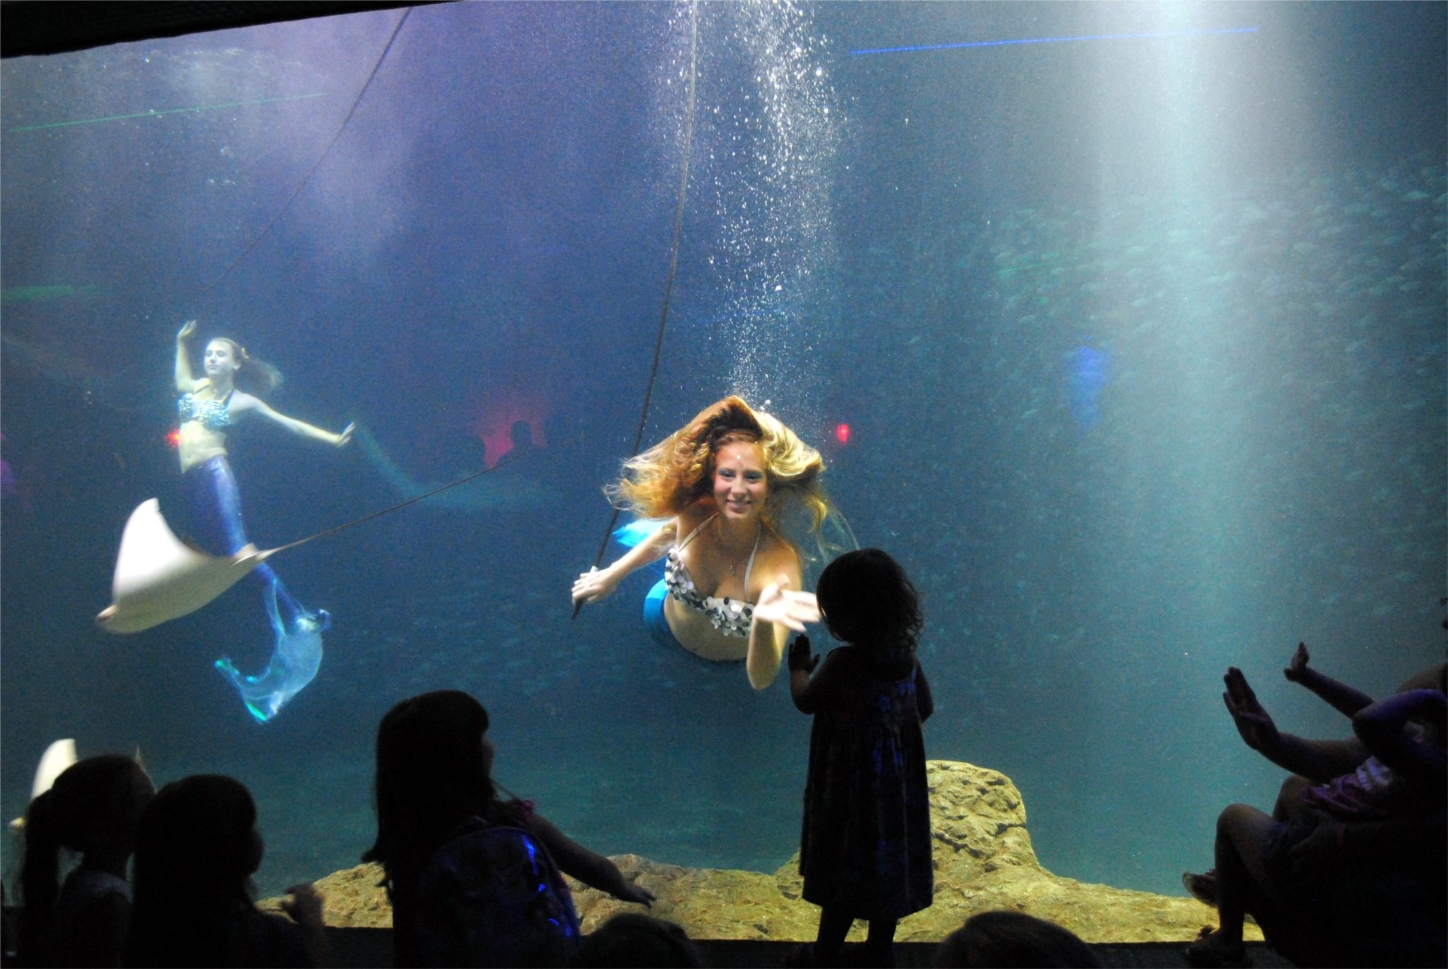 The Florida Aquarium's has their very own mermaids for special events